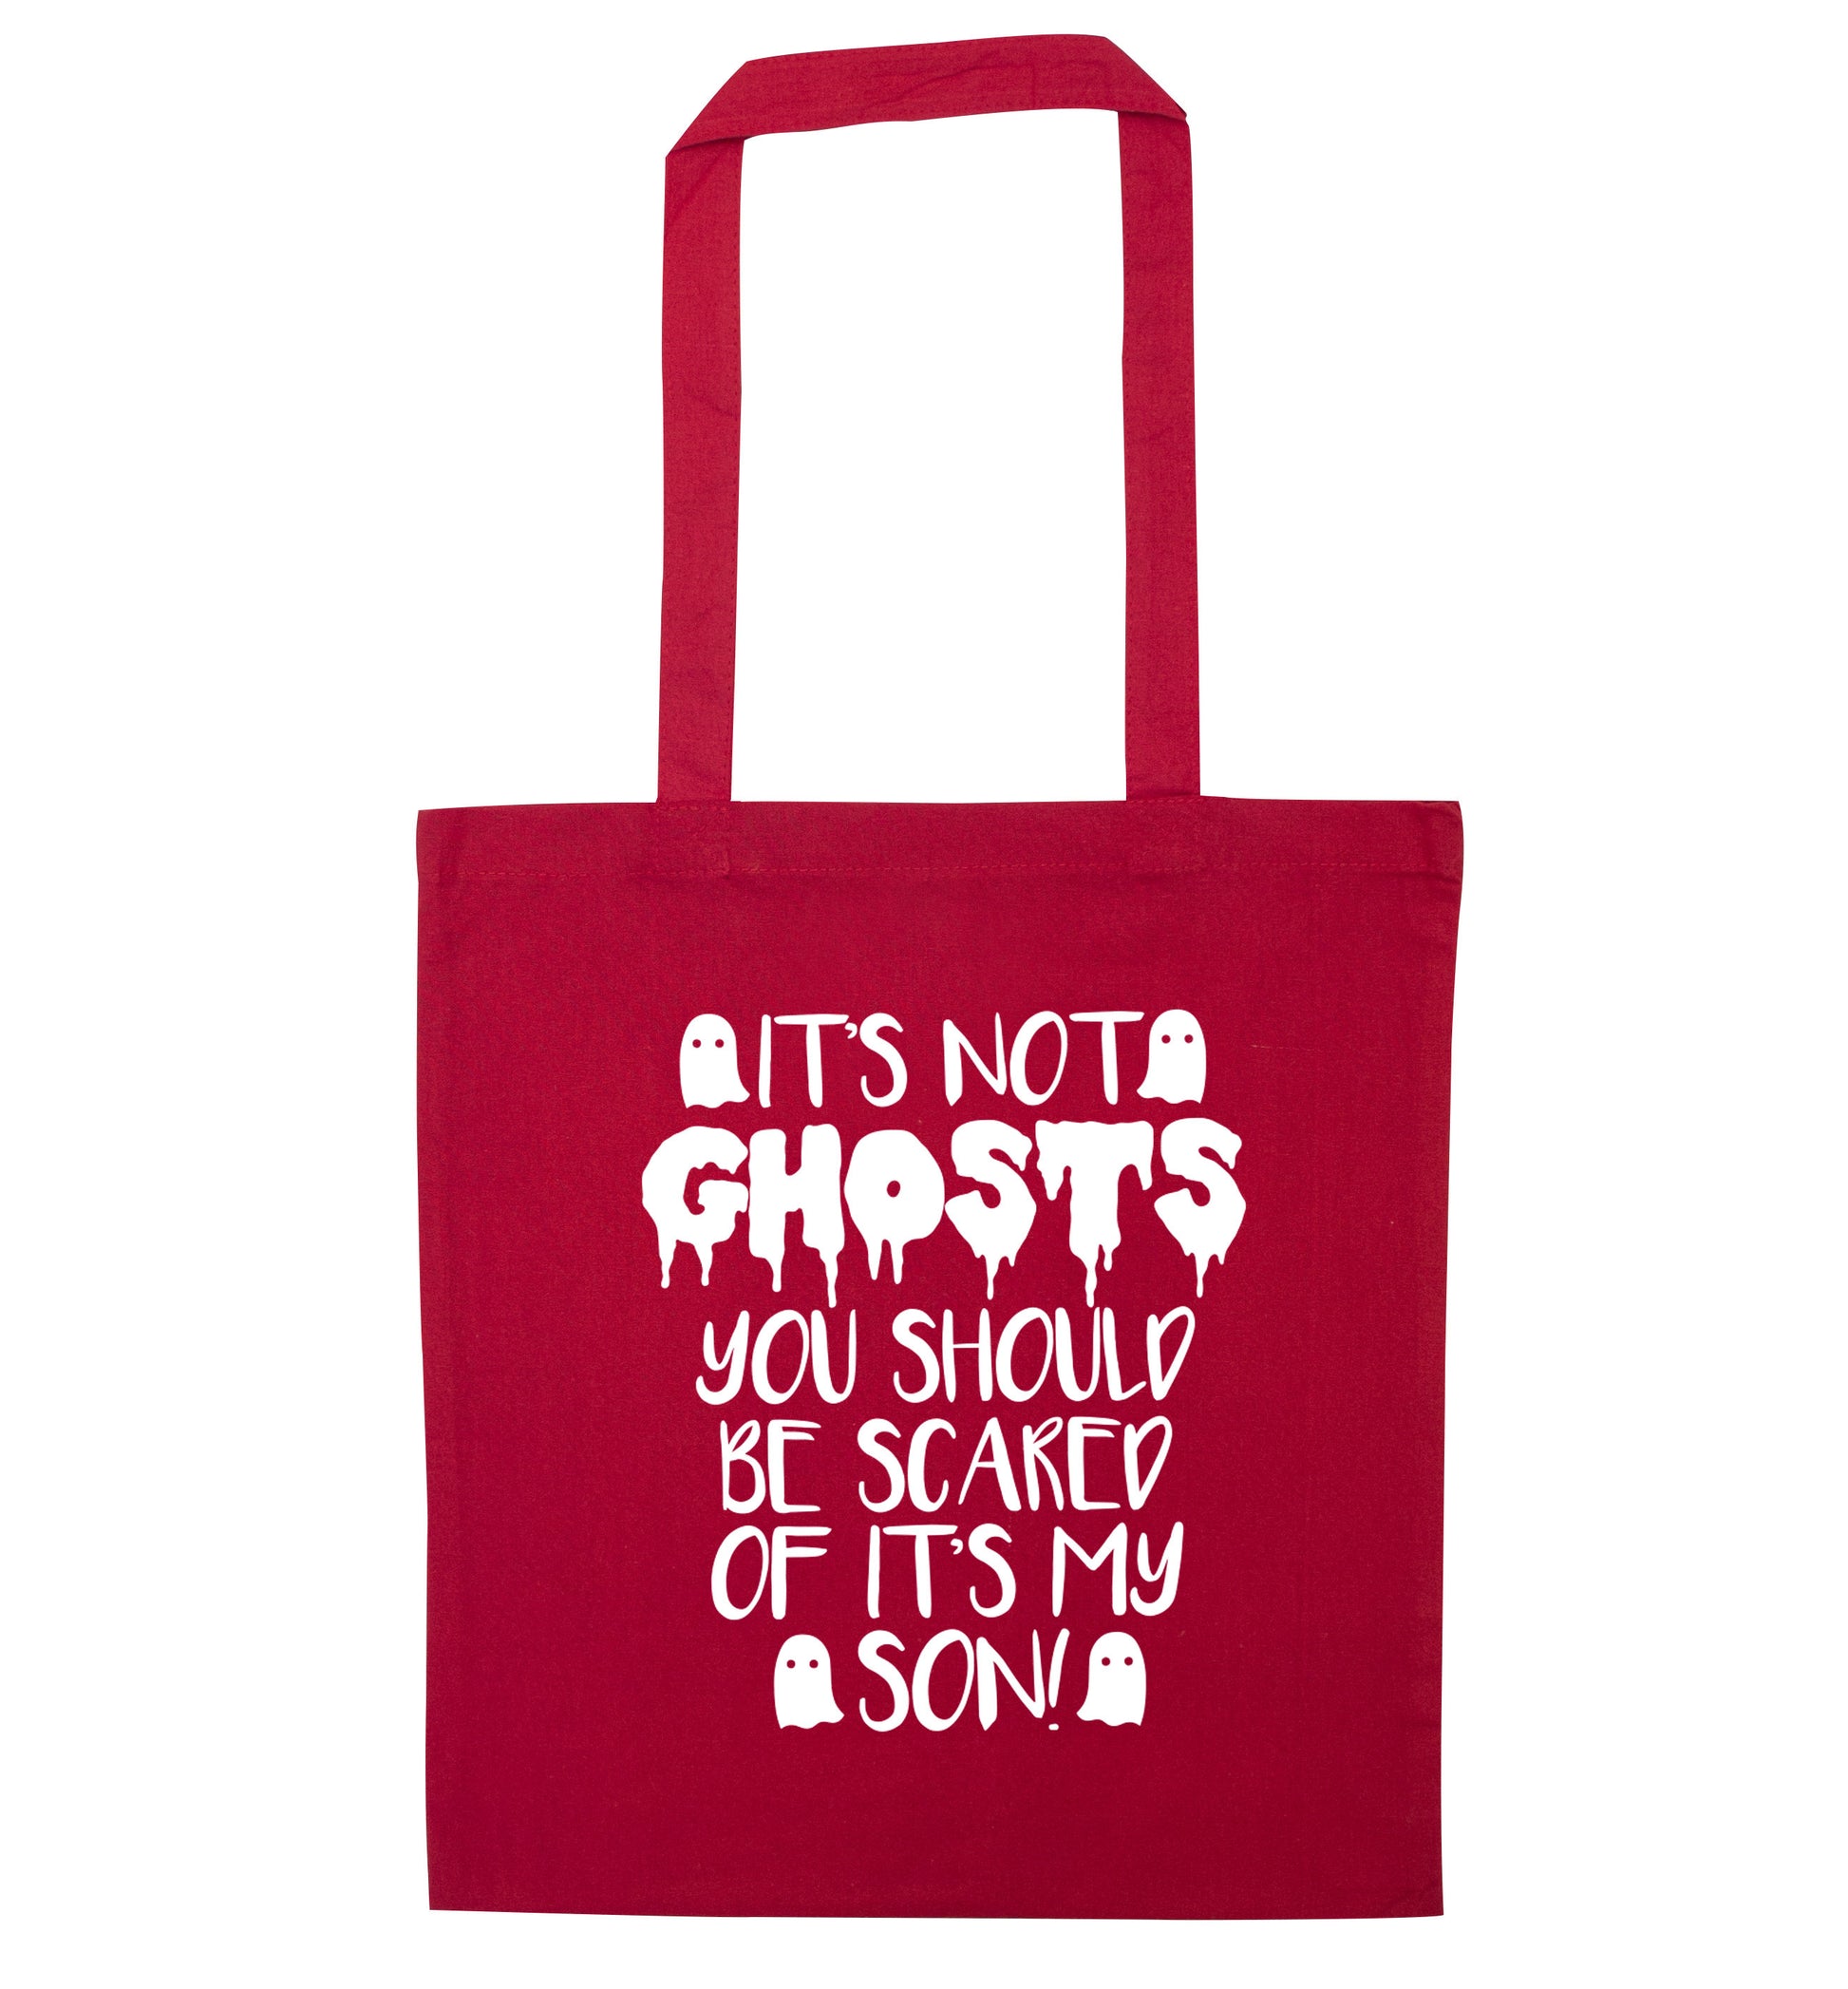 It's not ghosts you should be scared of it's my son! red tote bag